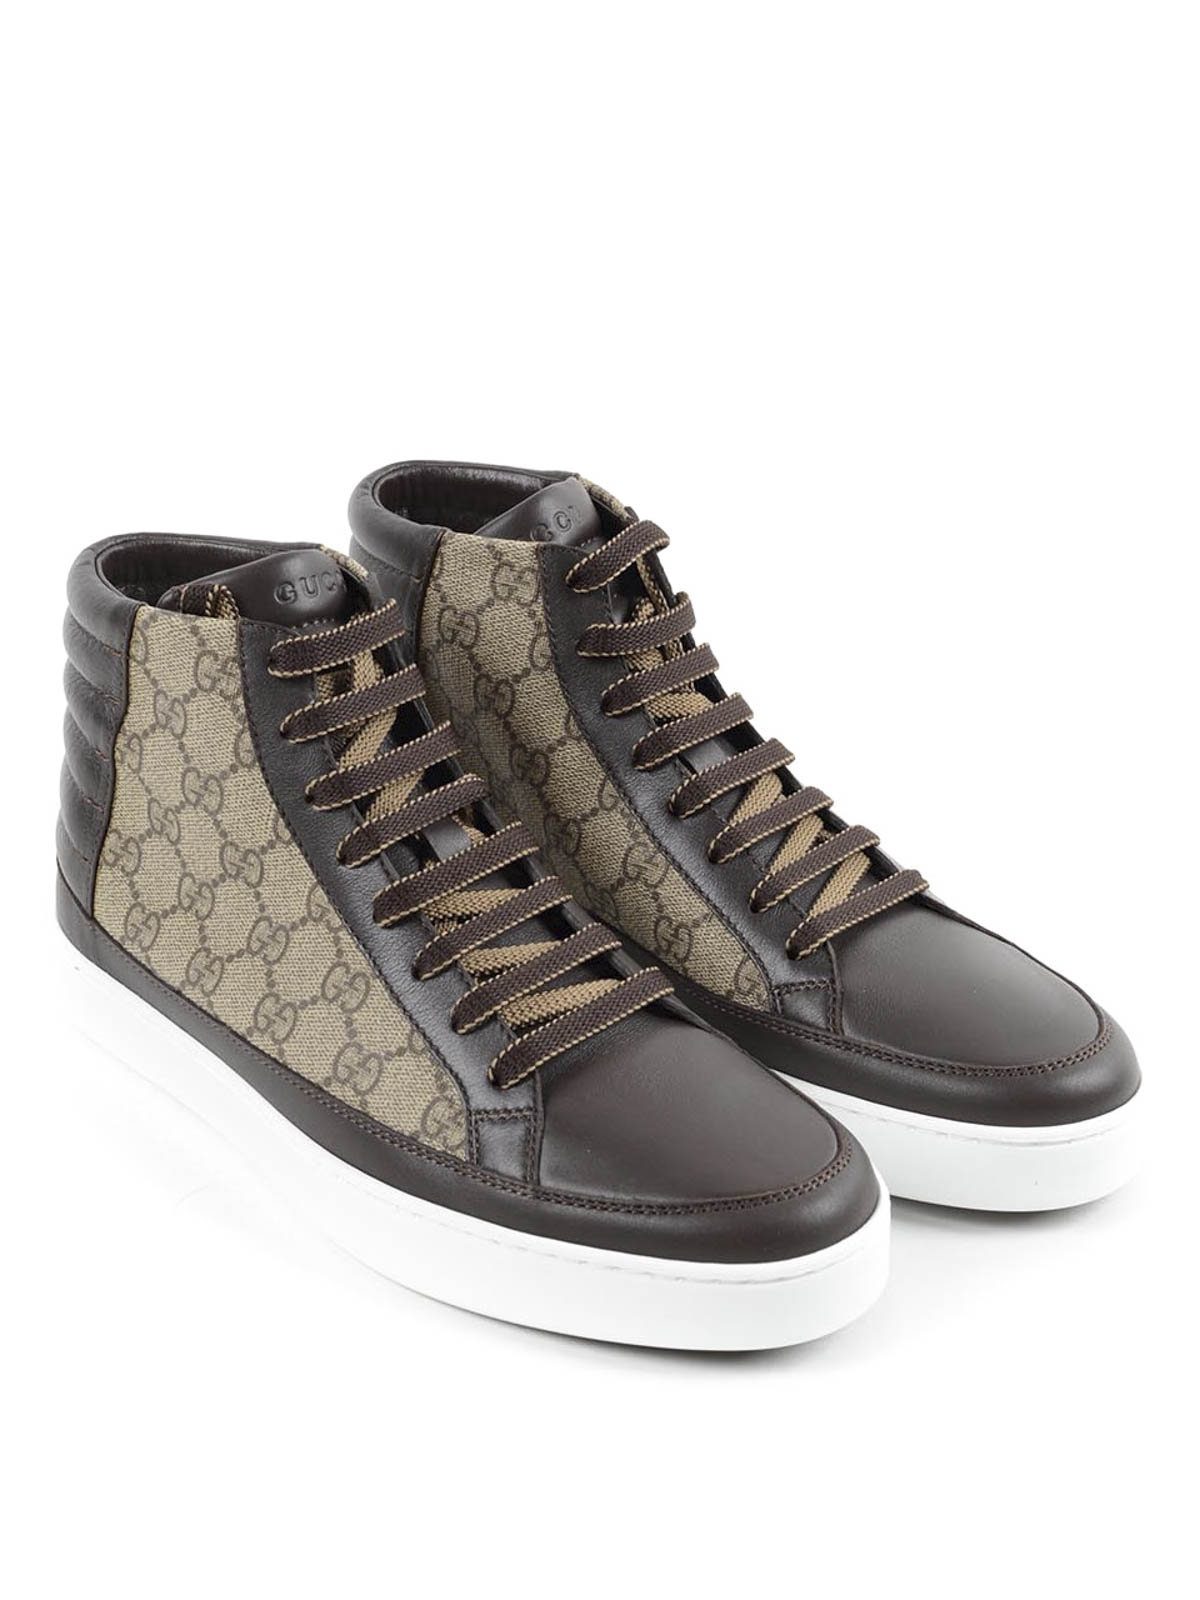 gucci sneaker boots